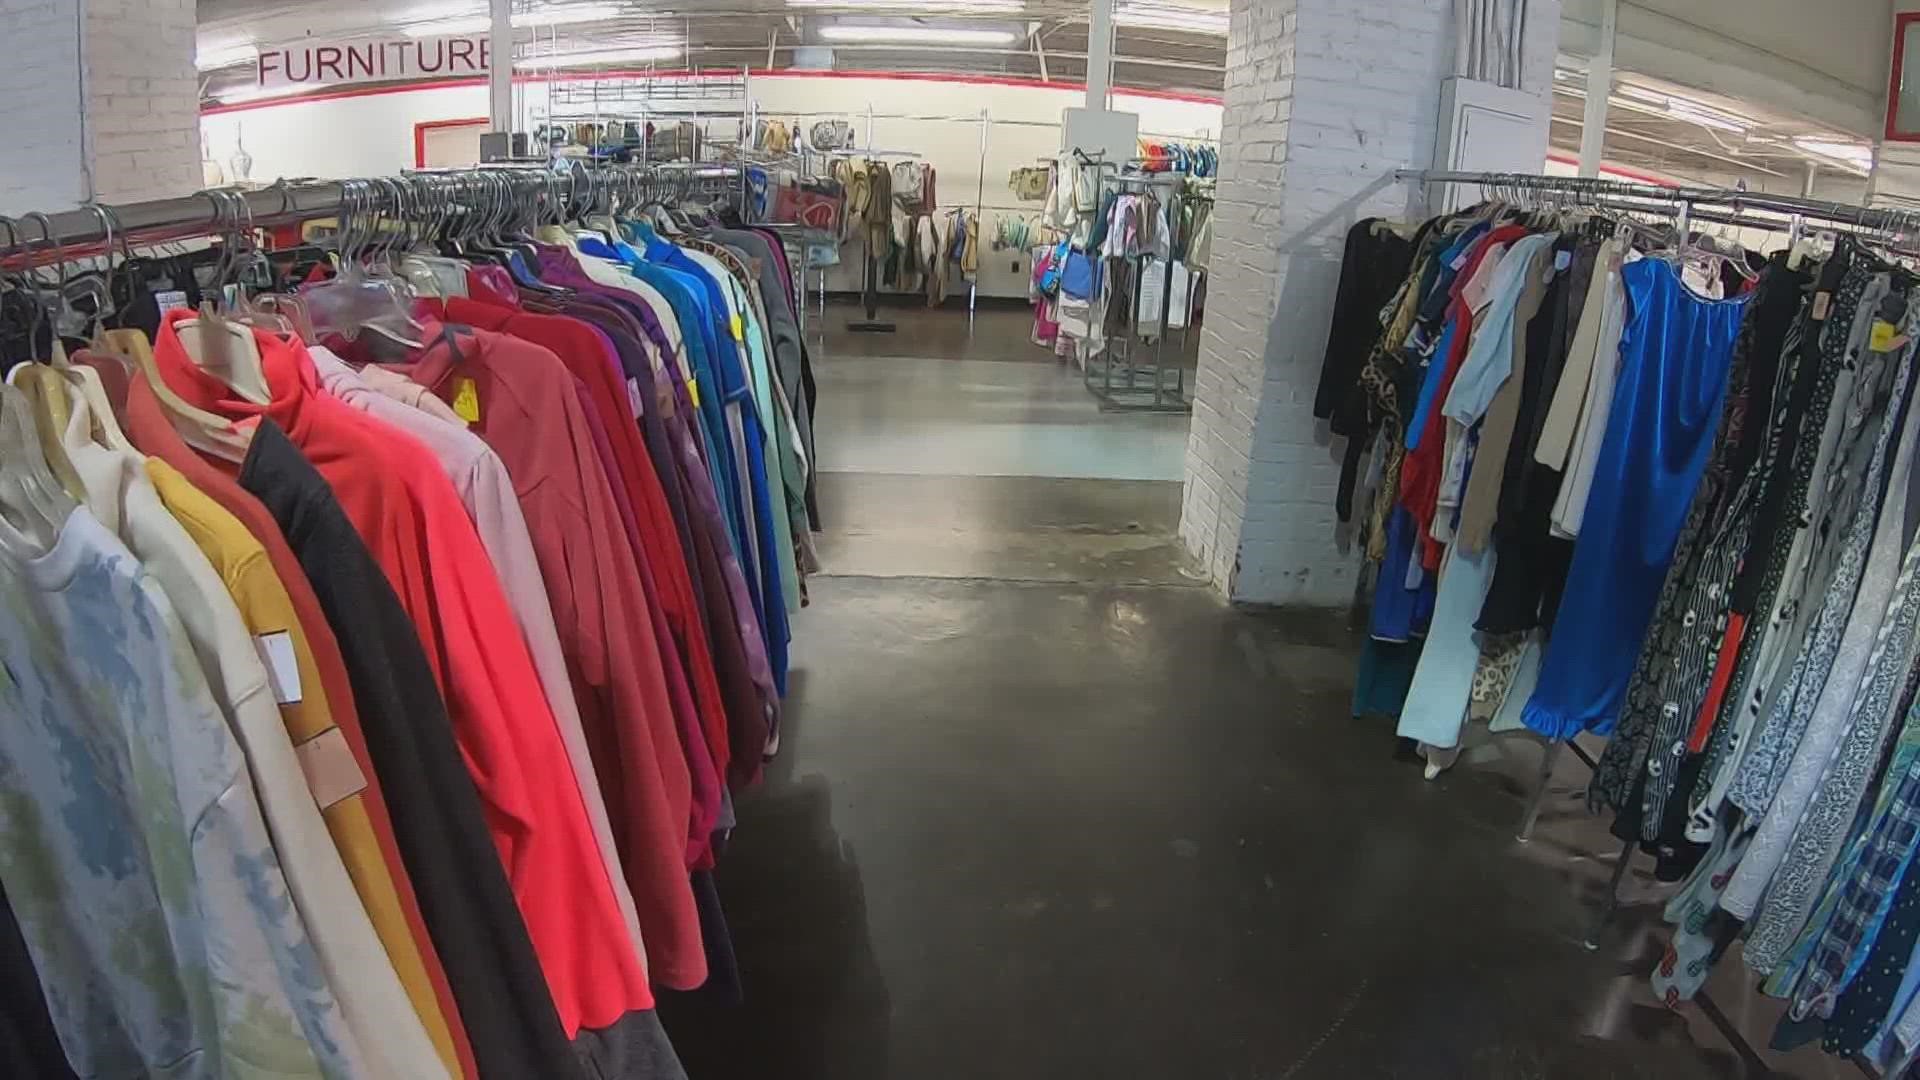 Thrift store shops are seeing a big boom right now thanks to inflation. Experts say the average person saves close to $1,800 a year just by buying secondhand.